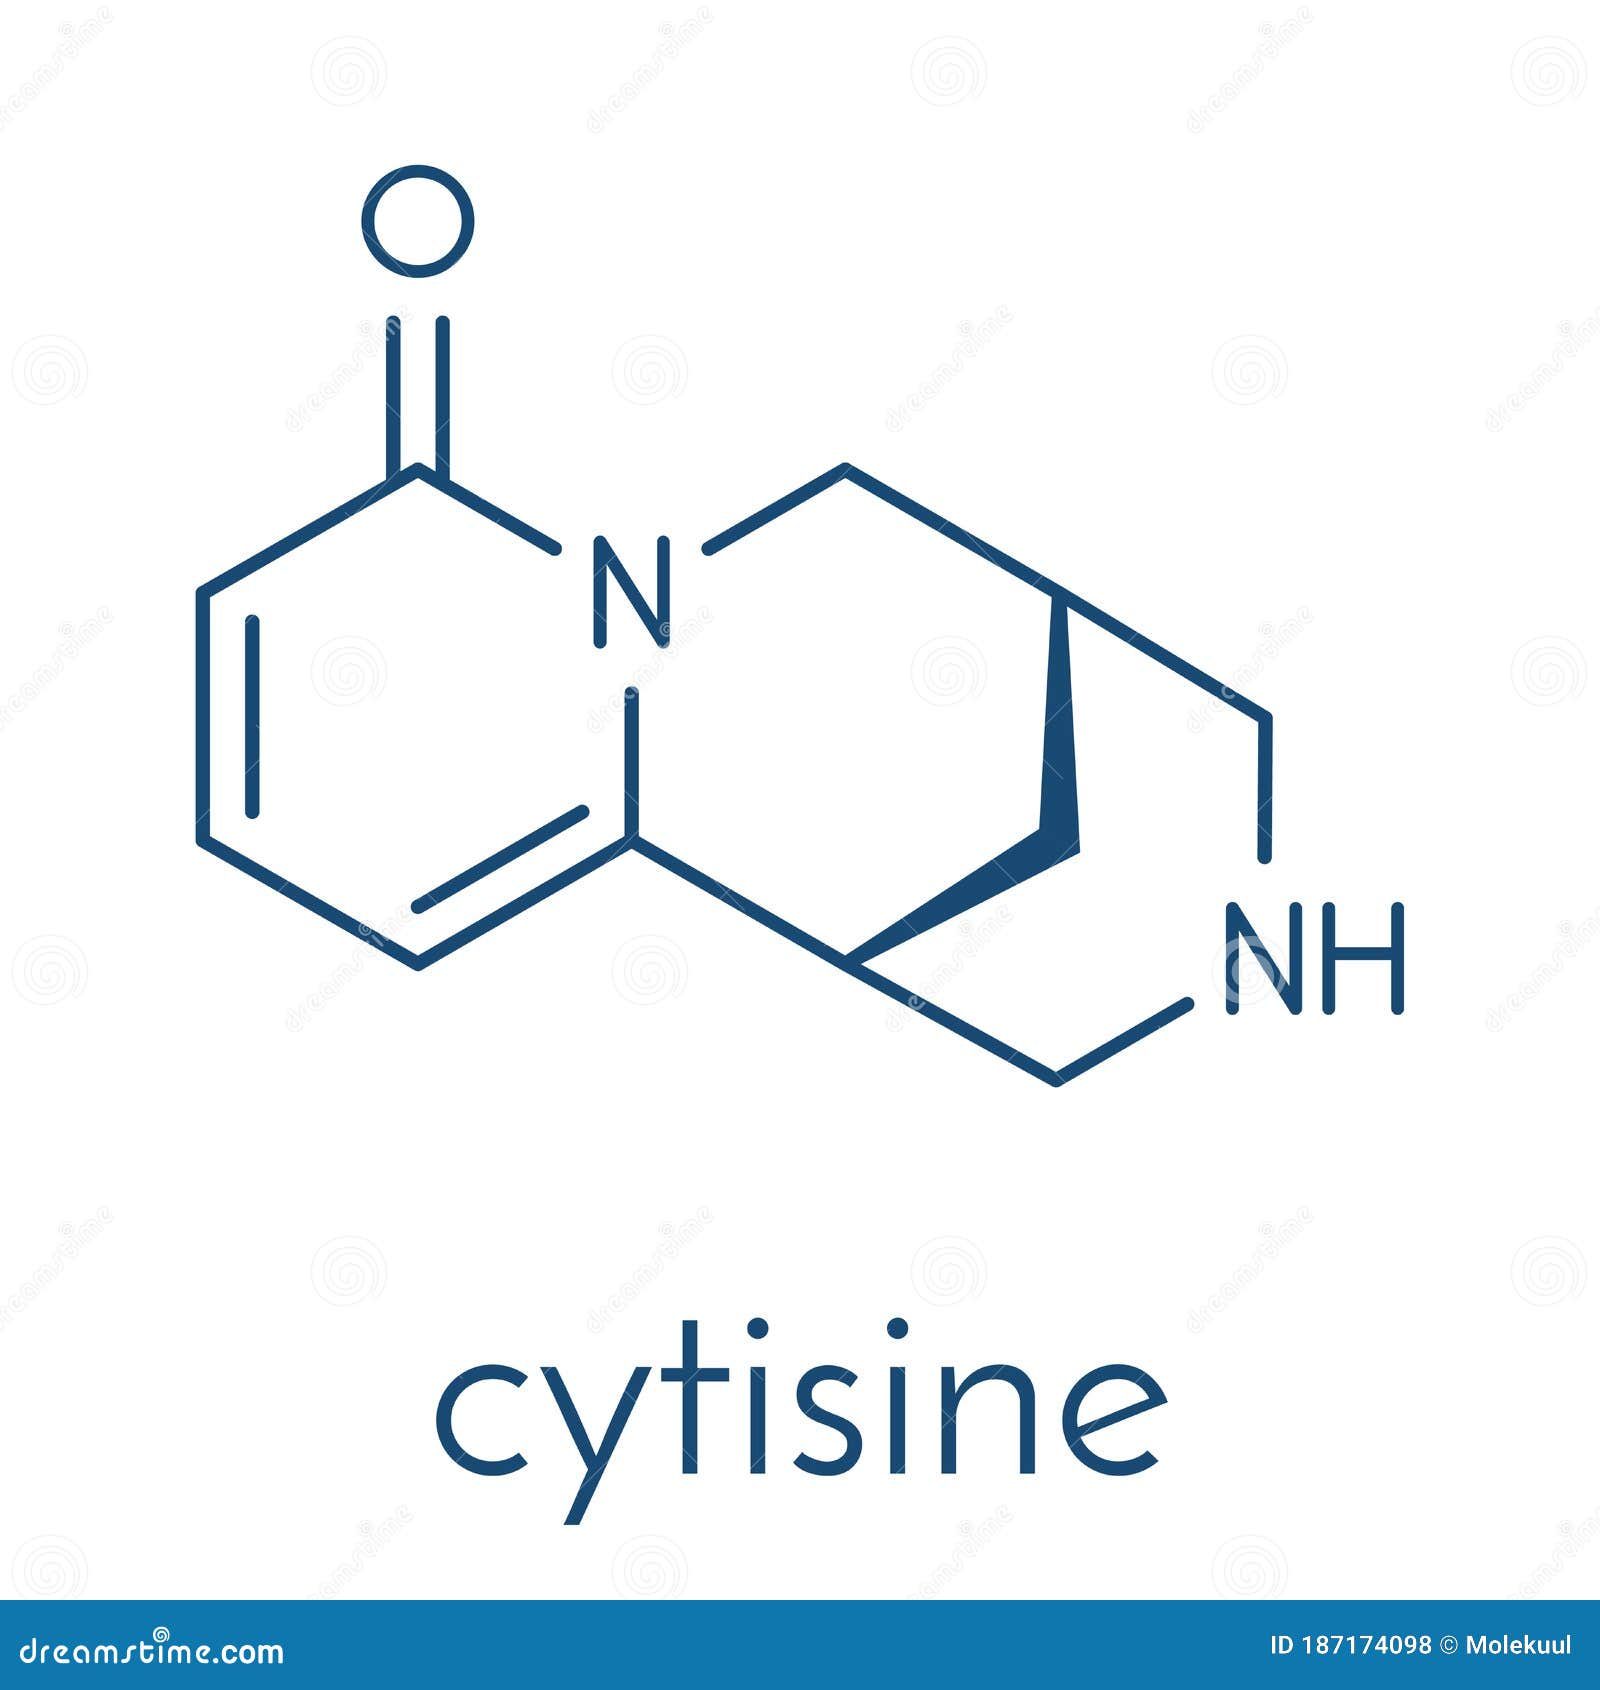 −)-Cytisine: Access to a stereochemically defined and functionally flexible  piperidine scaffold - Organic & Biomolecular Chemistry (RSC Publishing)